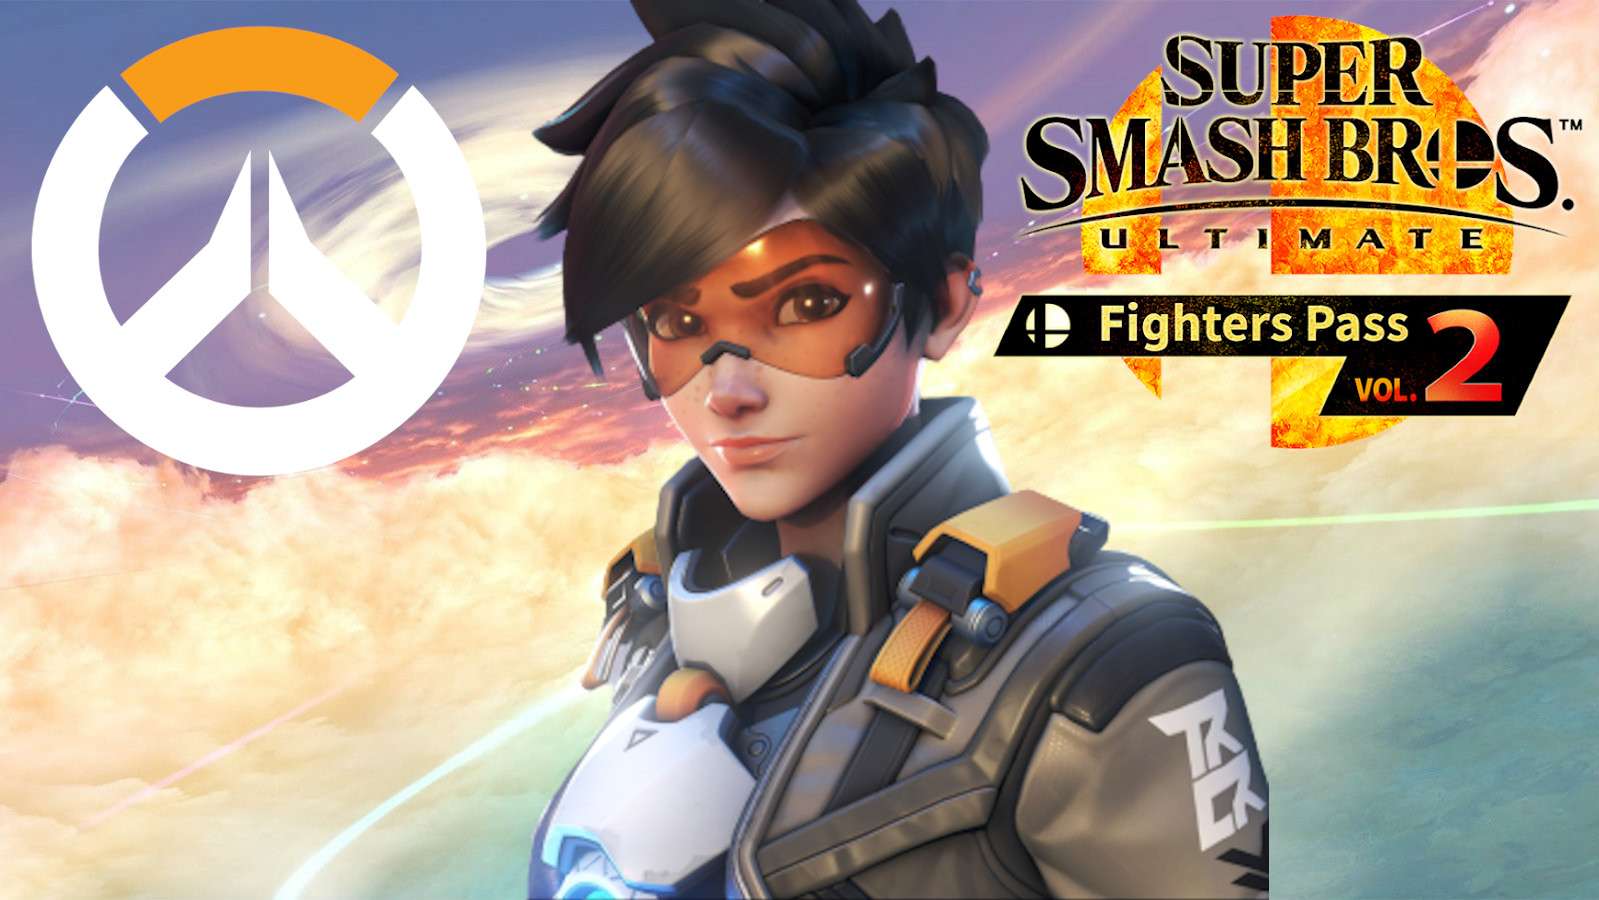 Tracer in Smash Ultimate's fighters pass volume 2